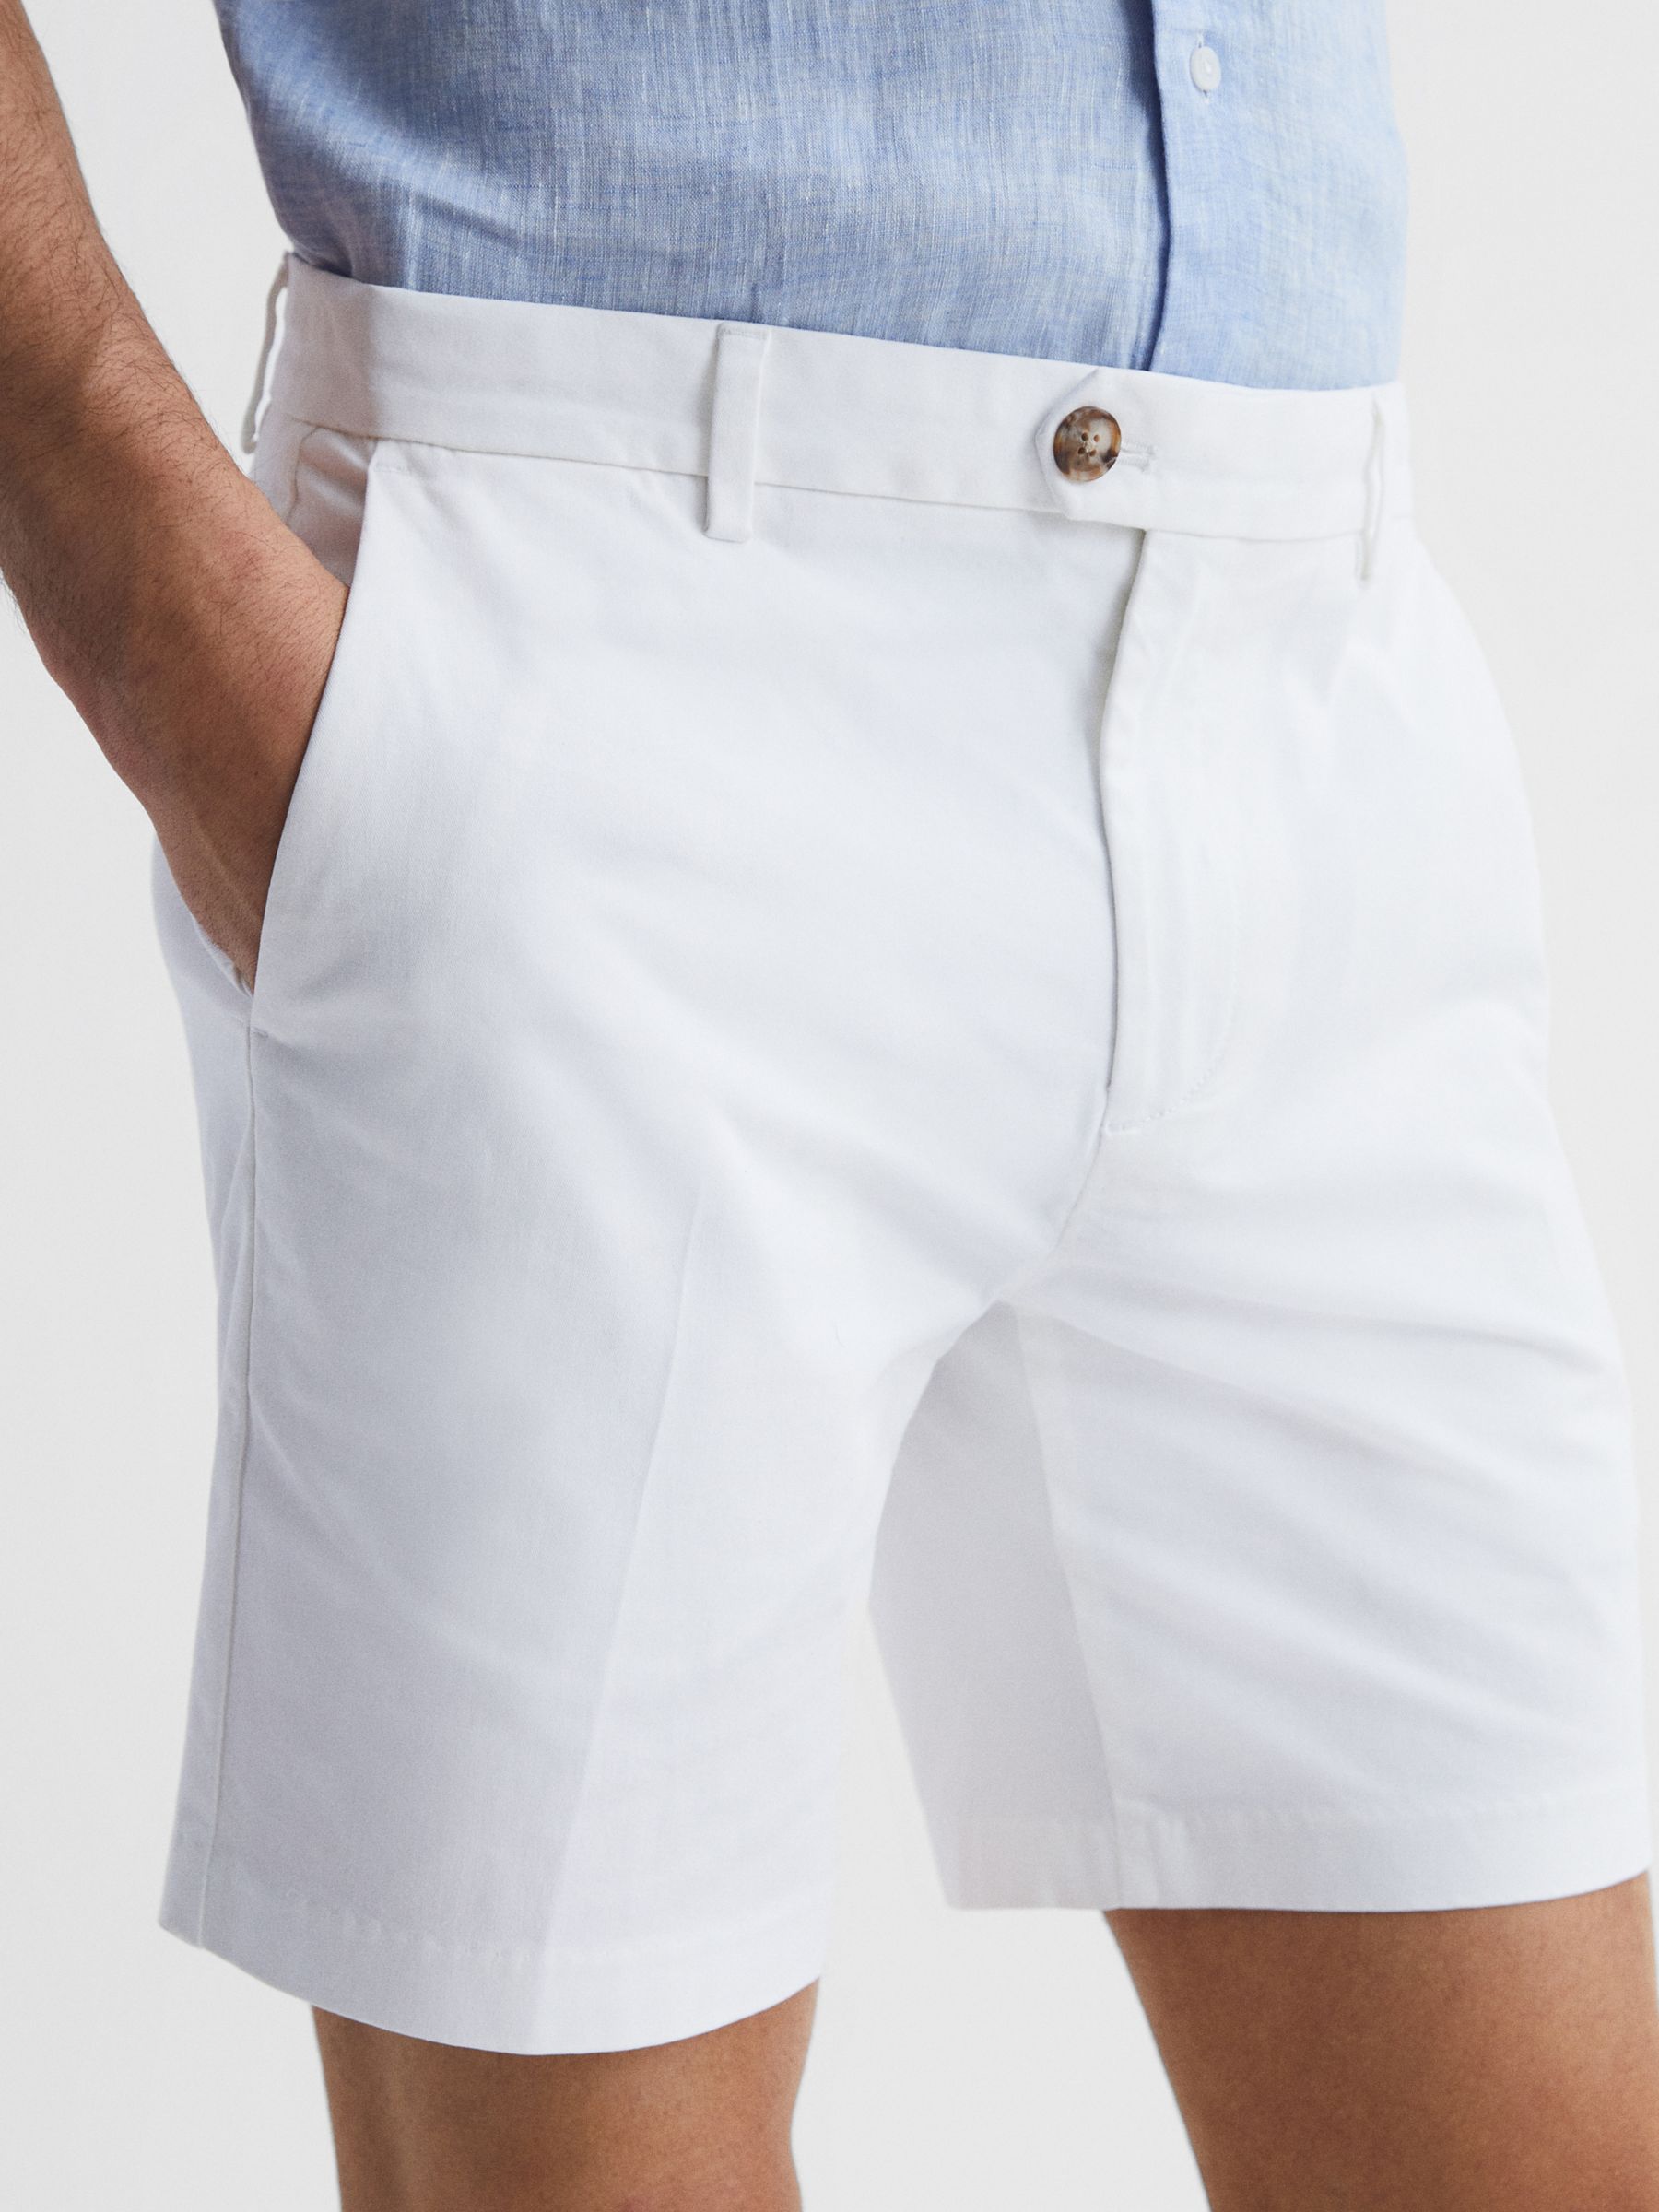 Reiss Wicket Casual Chino Shorts, White, 28R